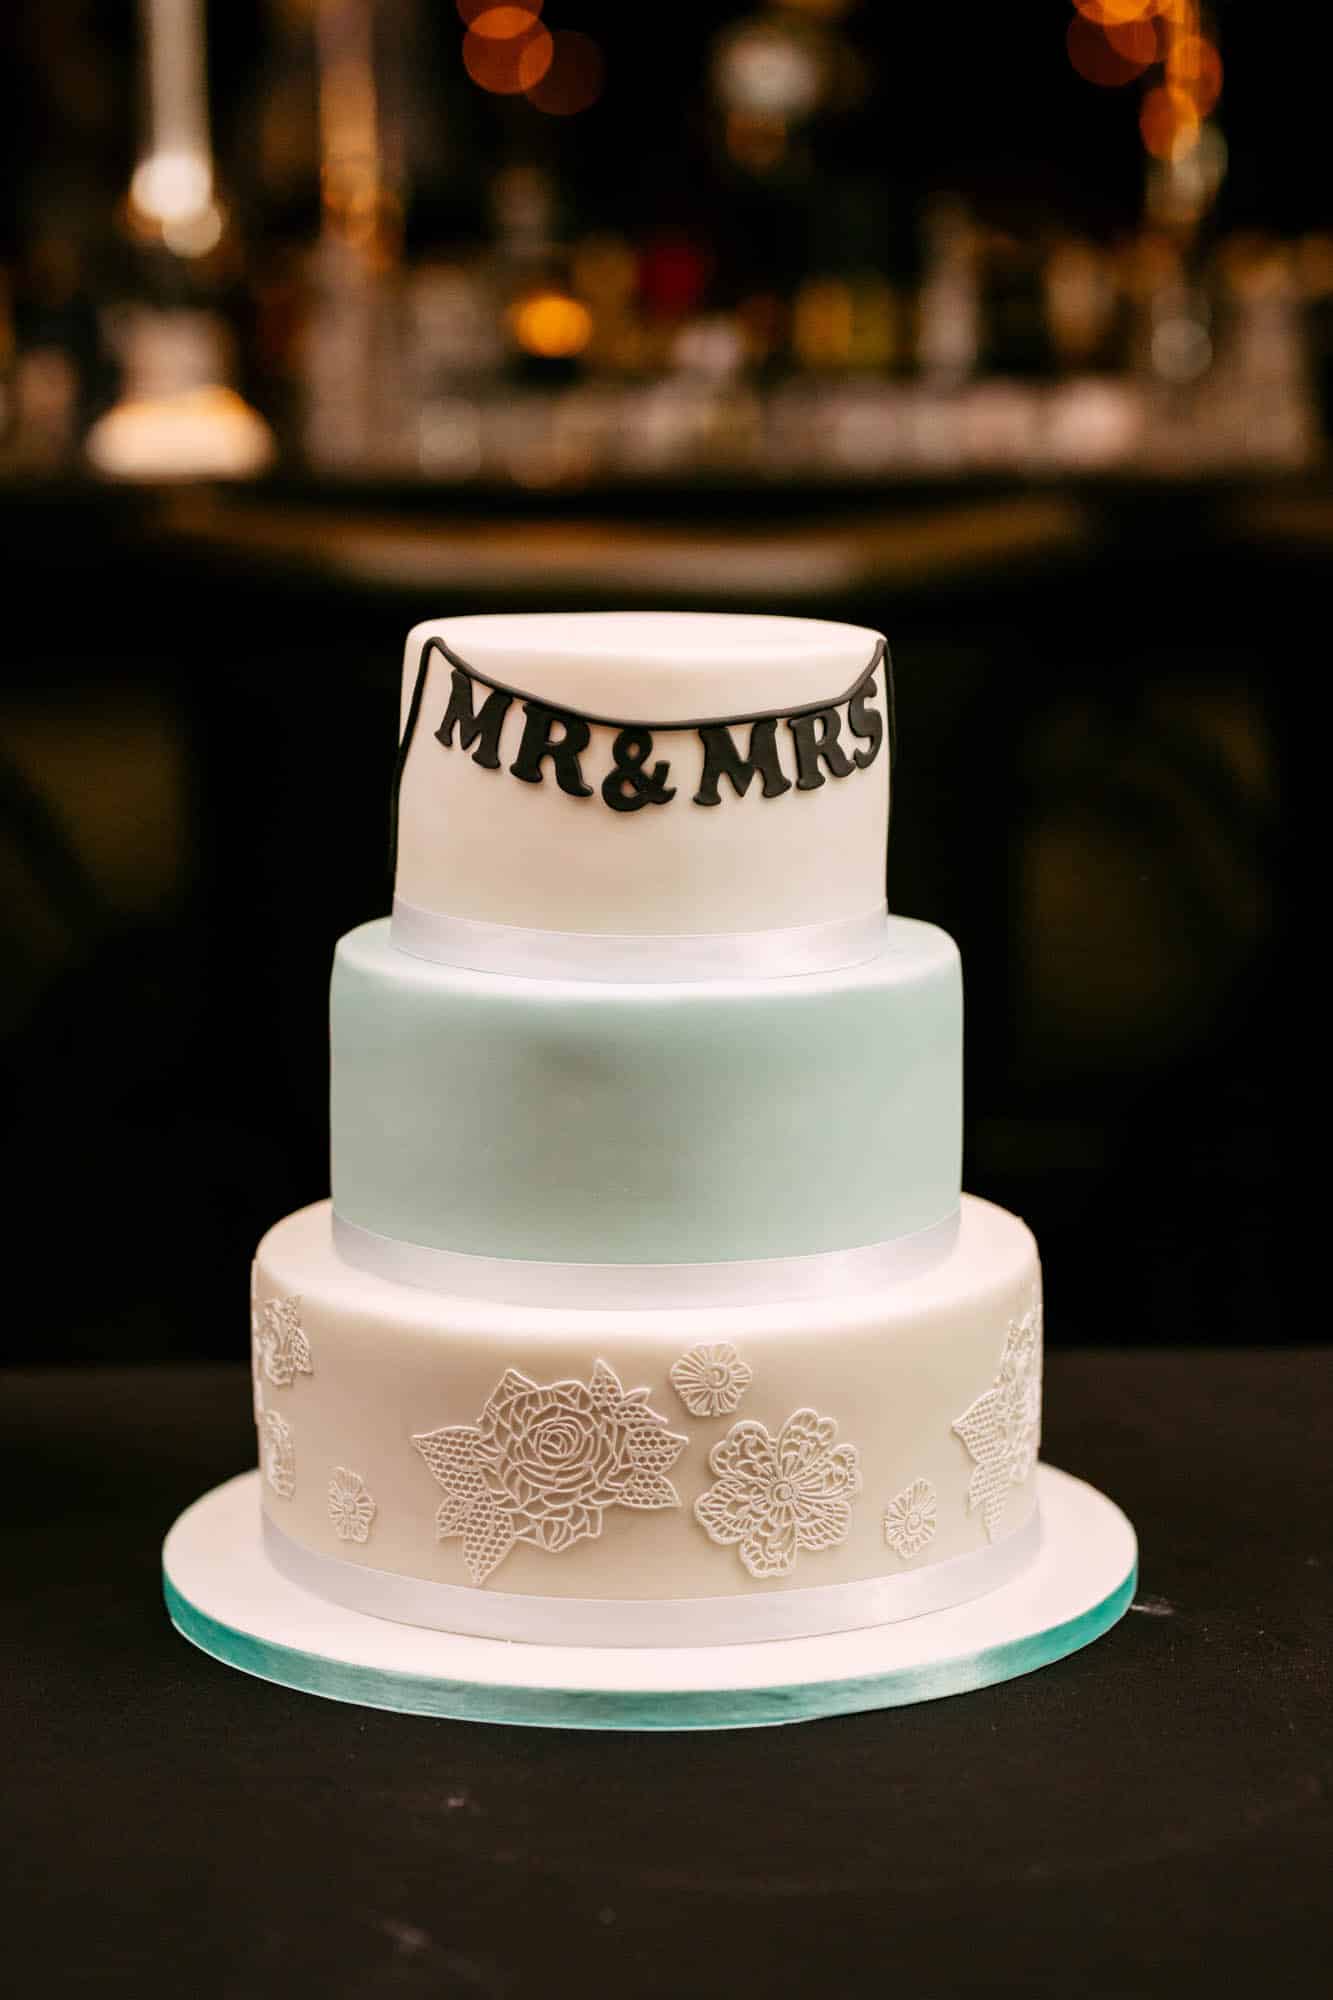 Description: A wedding cake with the words mr and mrs on it.